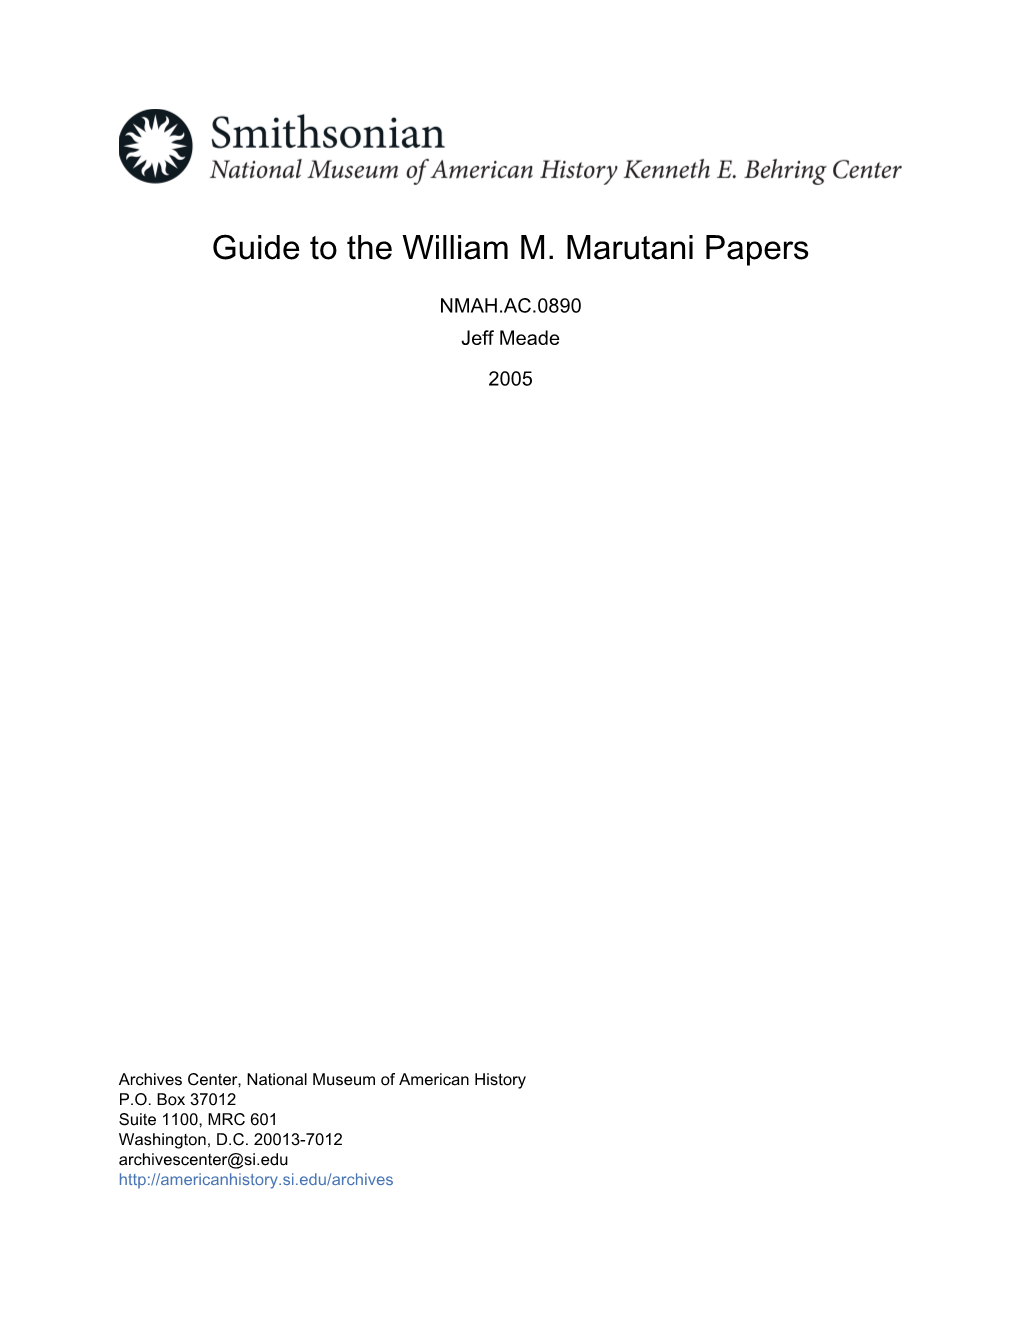 Guide to the William M. Marutani Papers